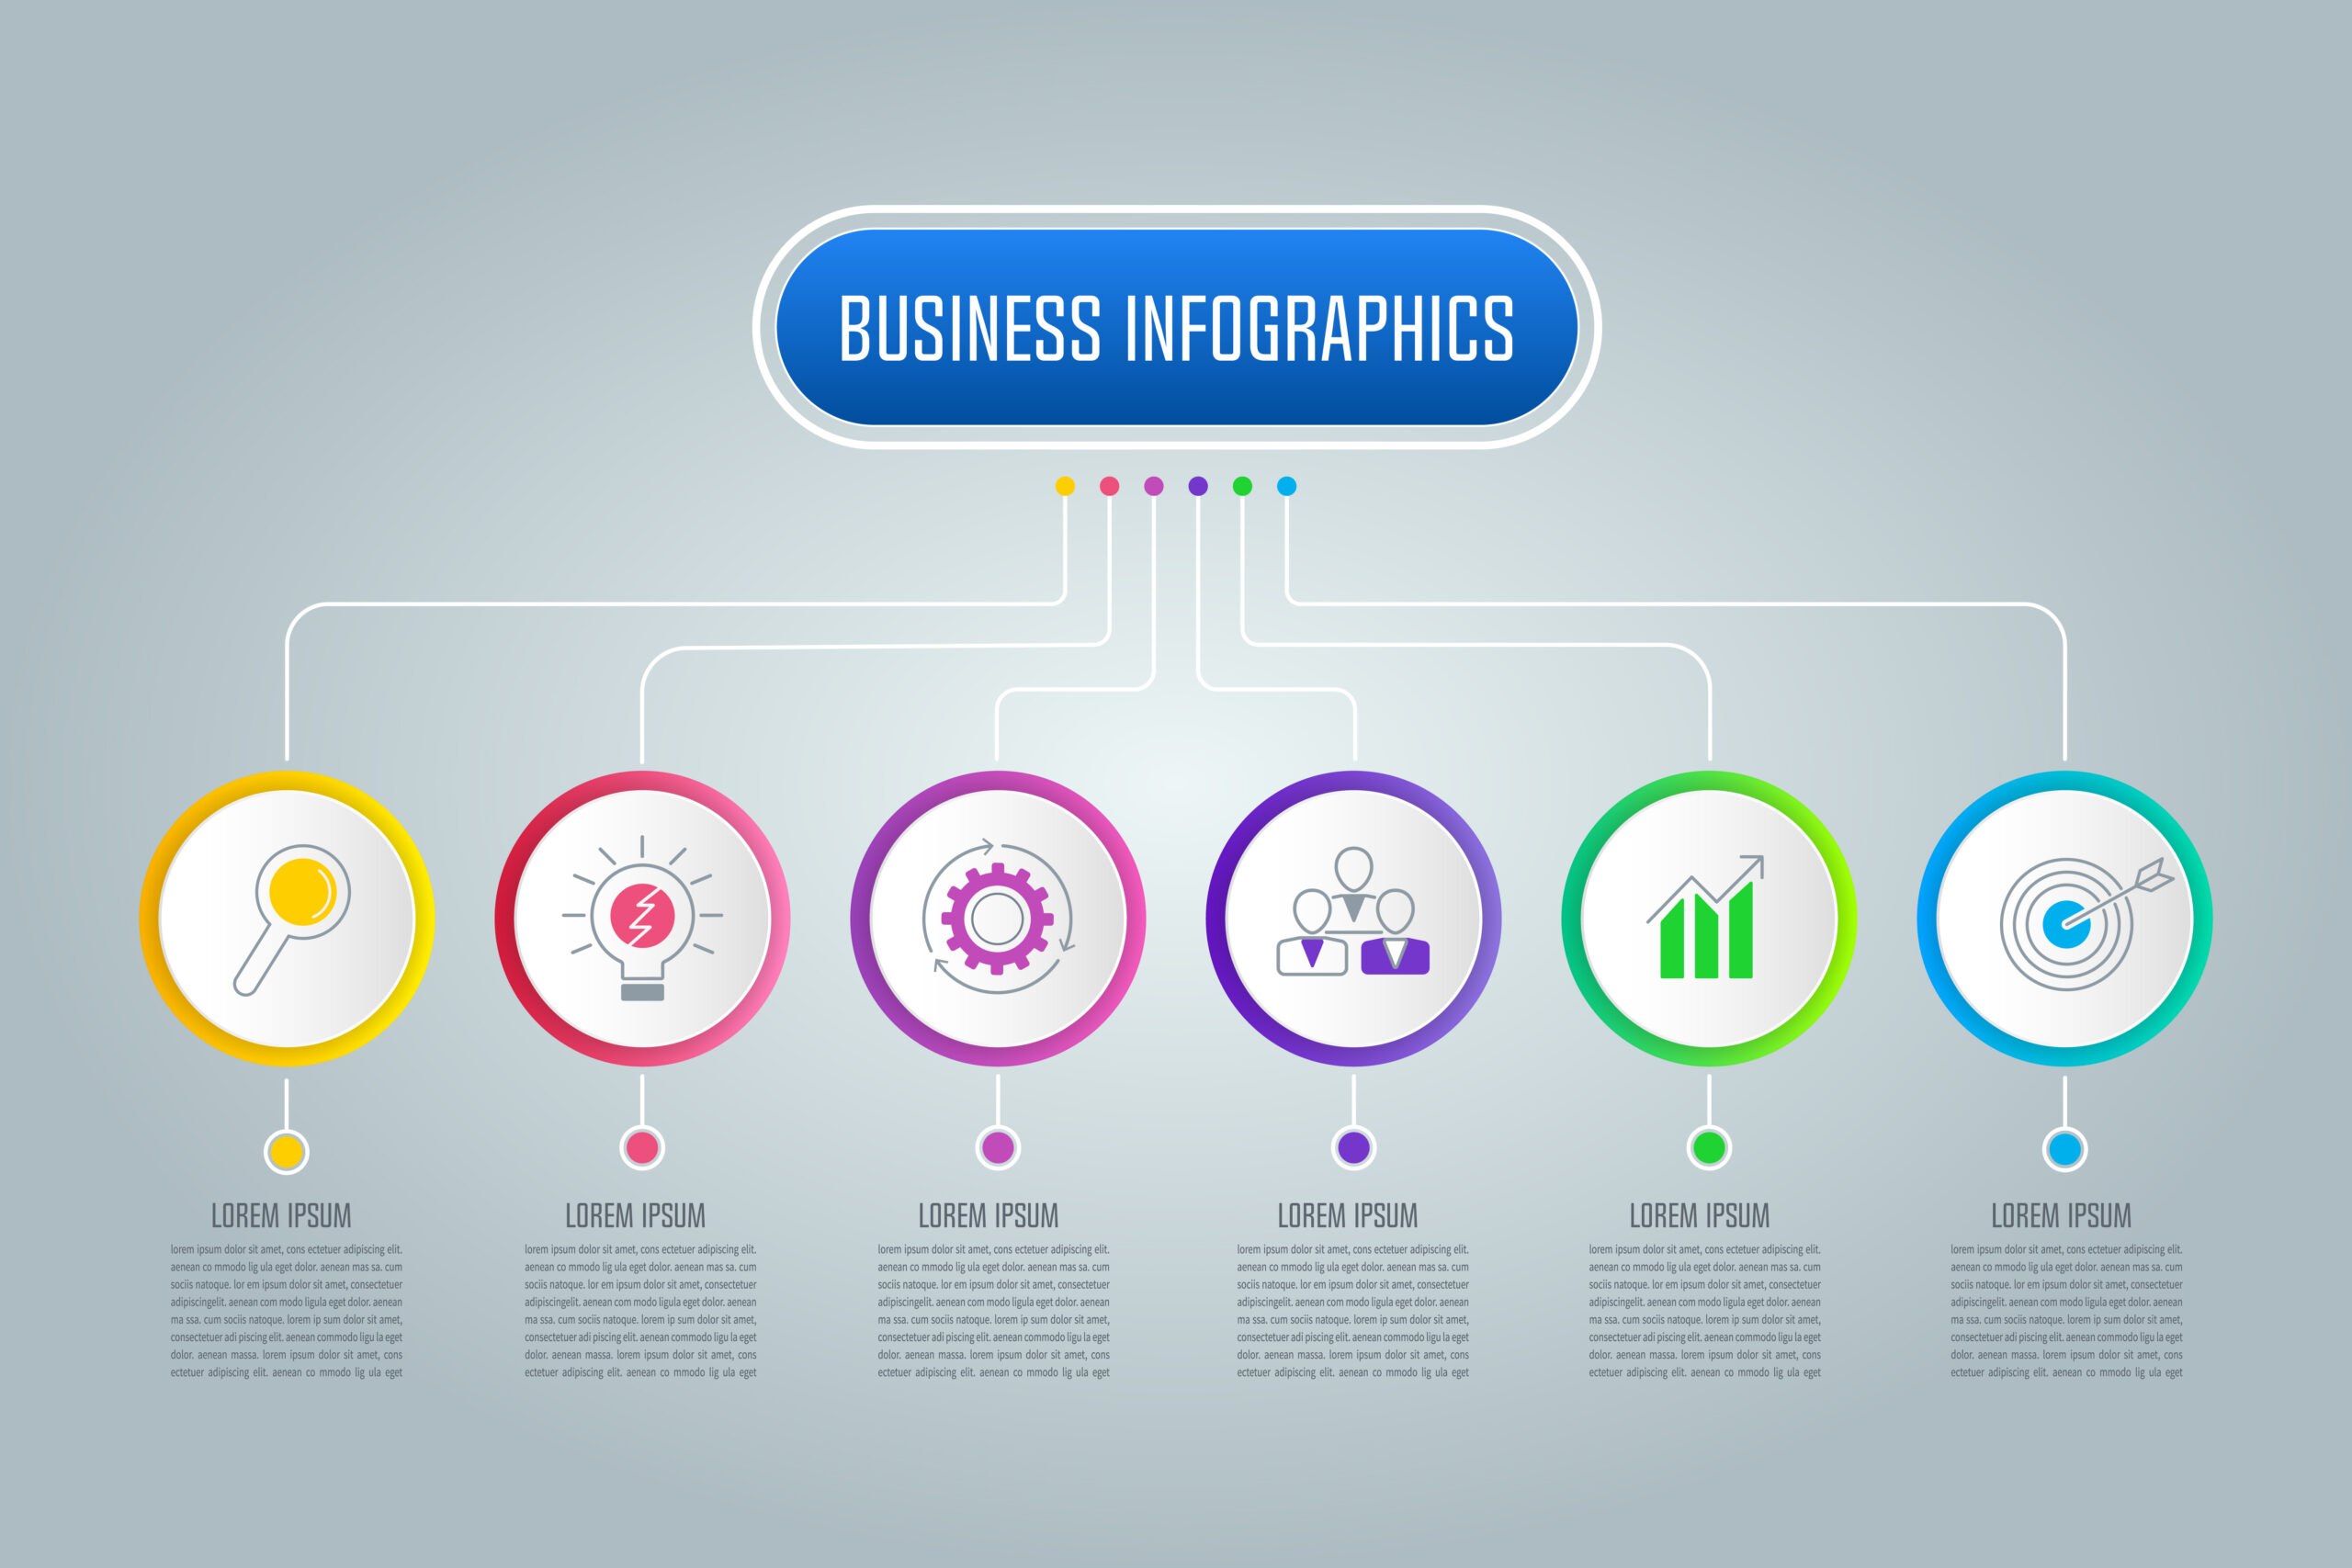 Infographic design organization chart template for business presentations, information banner ...